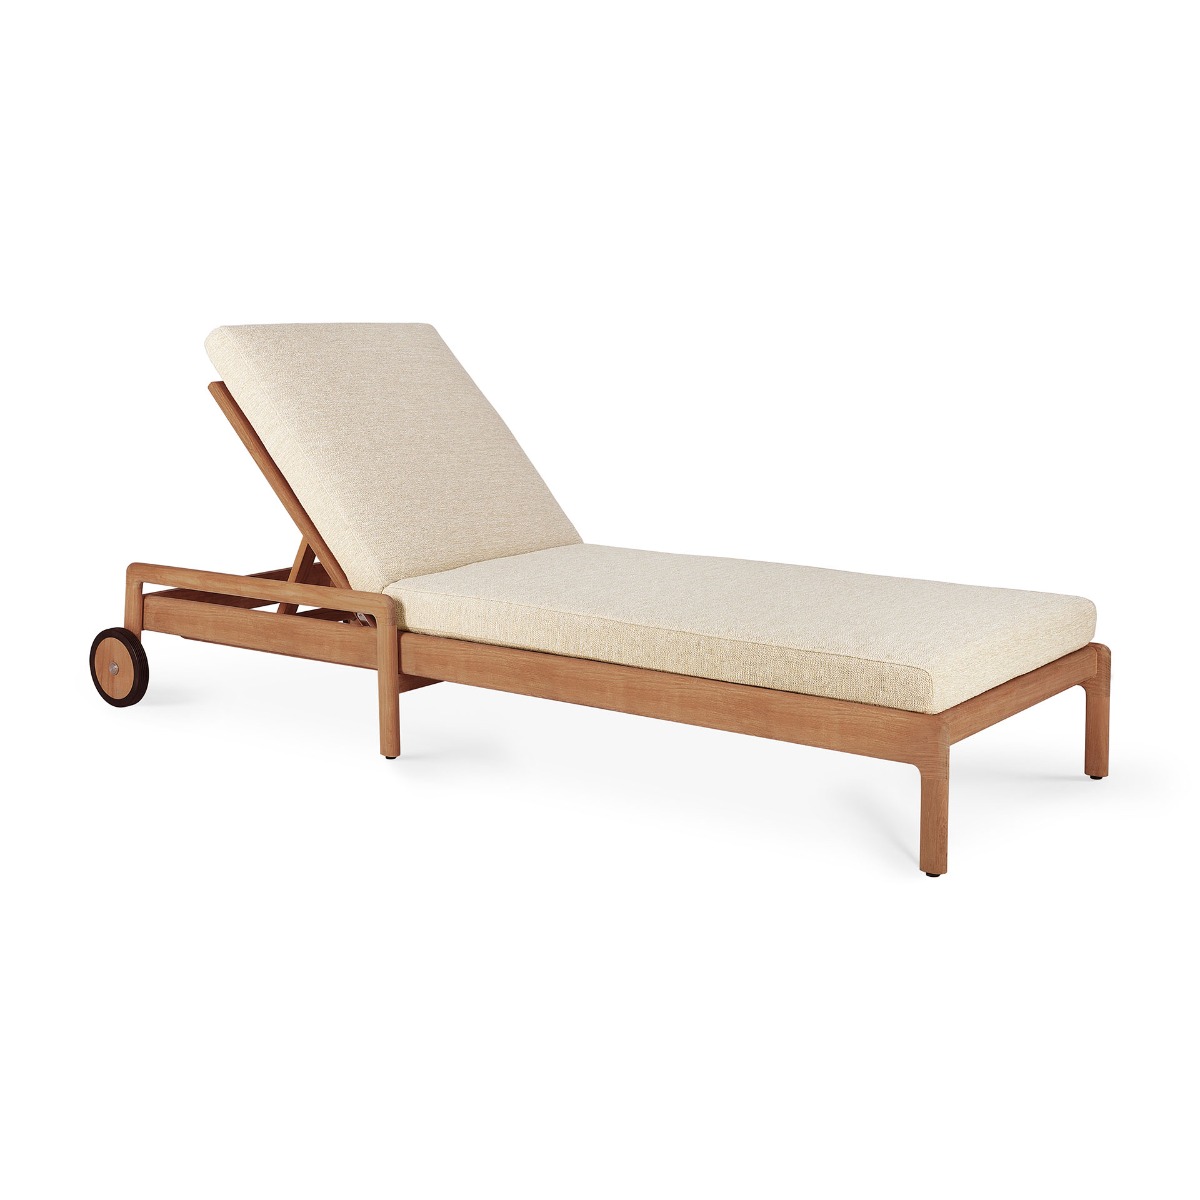 Jack outdoor adjustable lounger teak Natural fabric with thin cushion